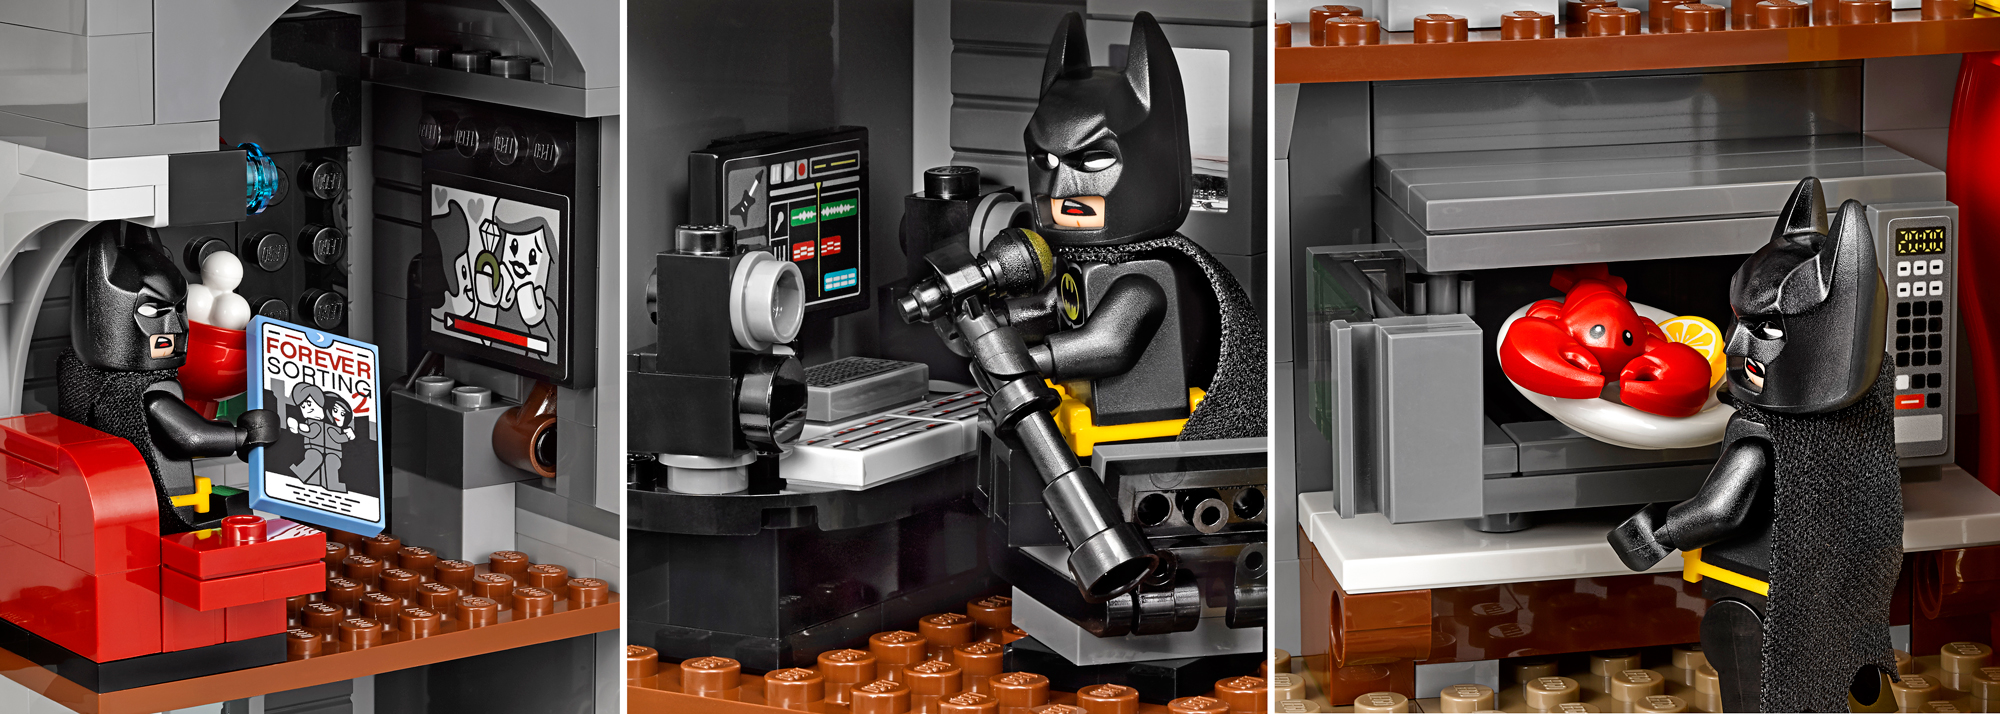 LEGO’s New Joker Manor Set Includes A Working Roller Coaster